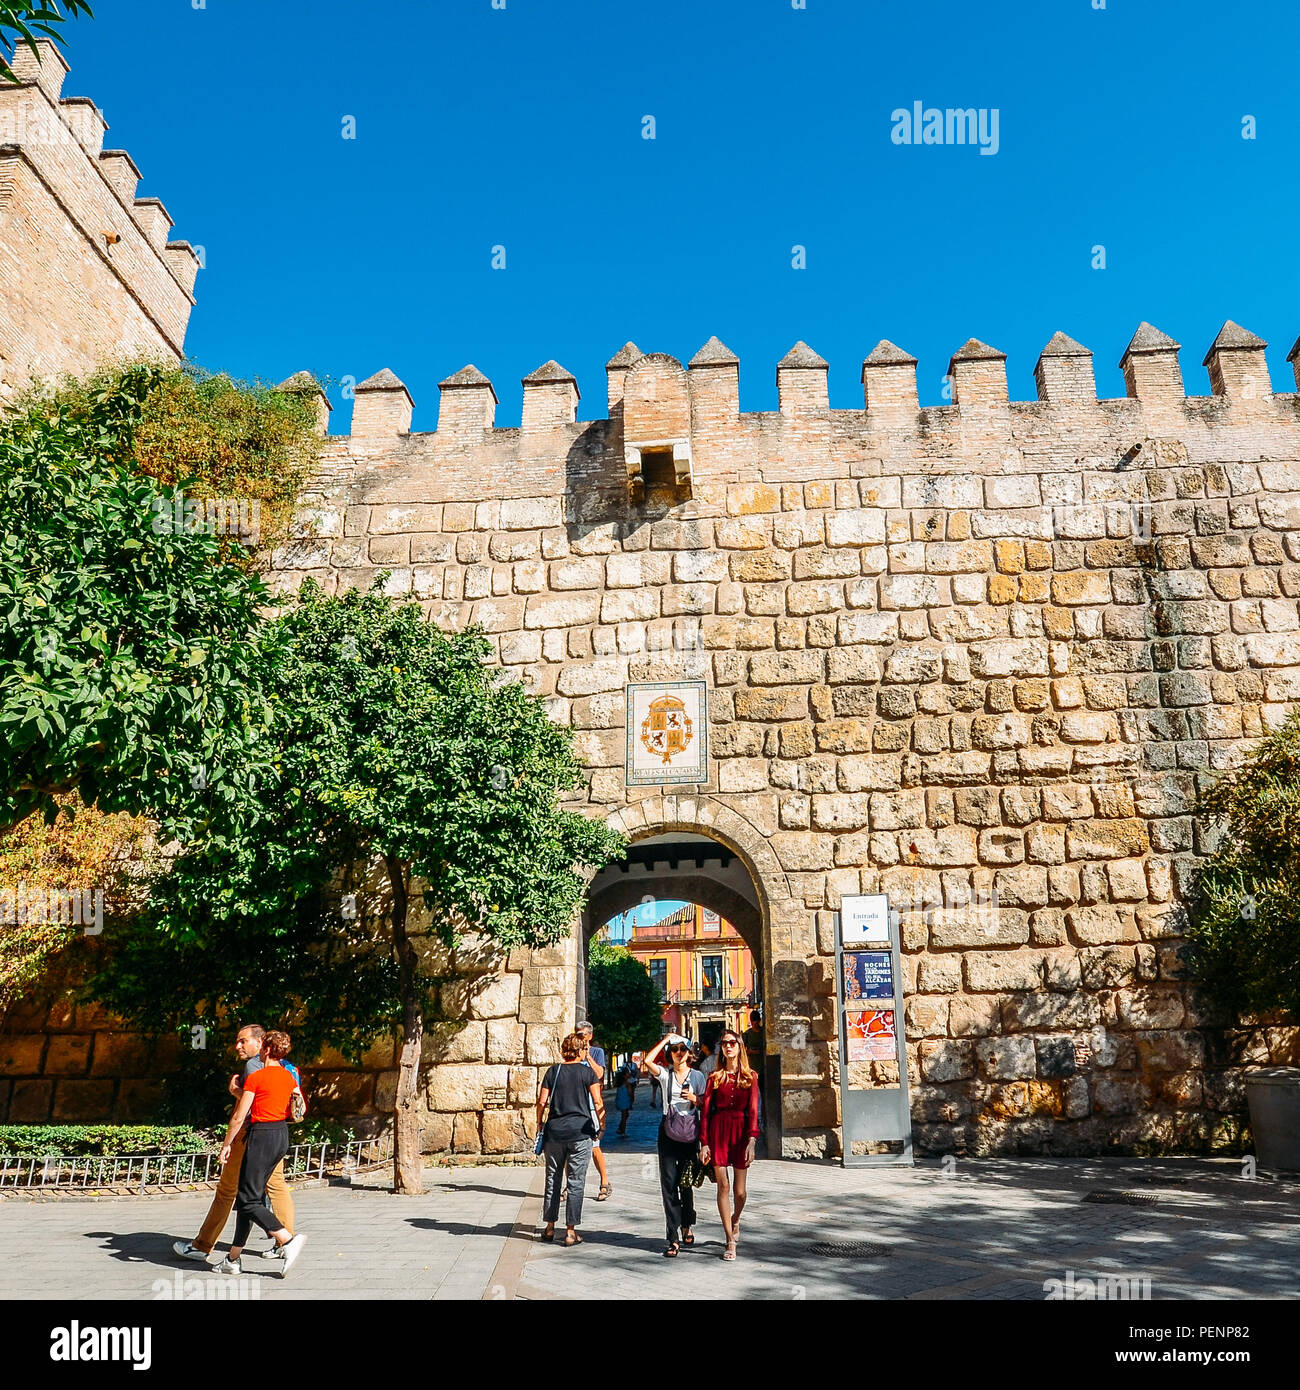 Seville, Spain - July 14th, 2018: Tourists at fortified entrance to the Alcazar Complex - UNESCO World Heritage Site Stock Photo